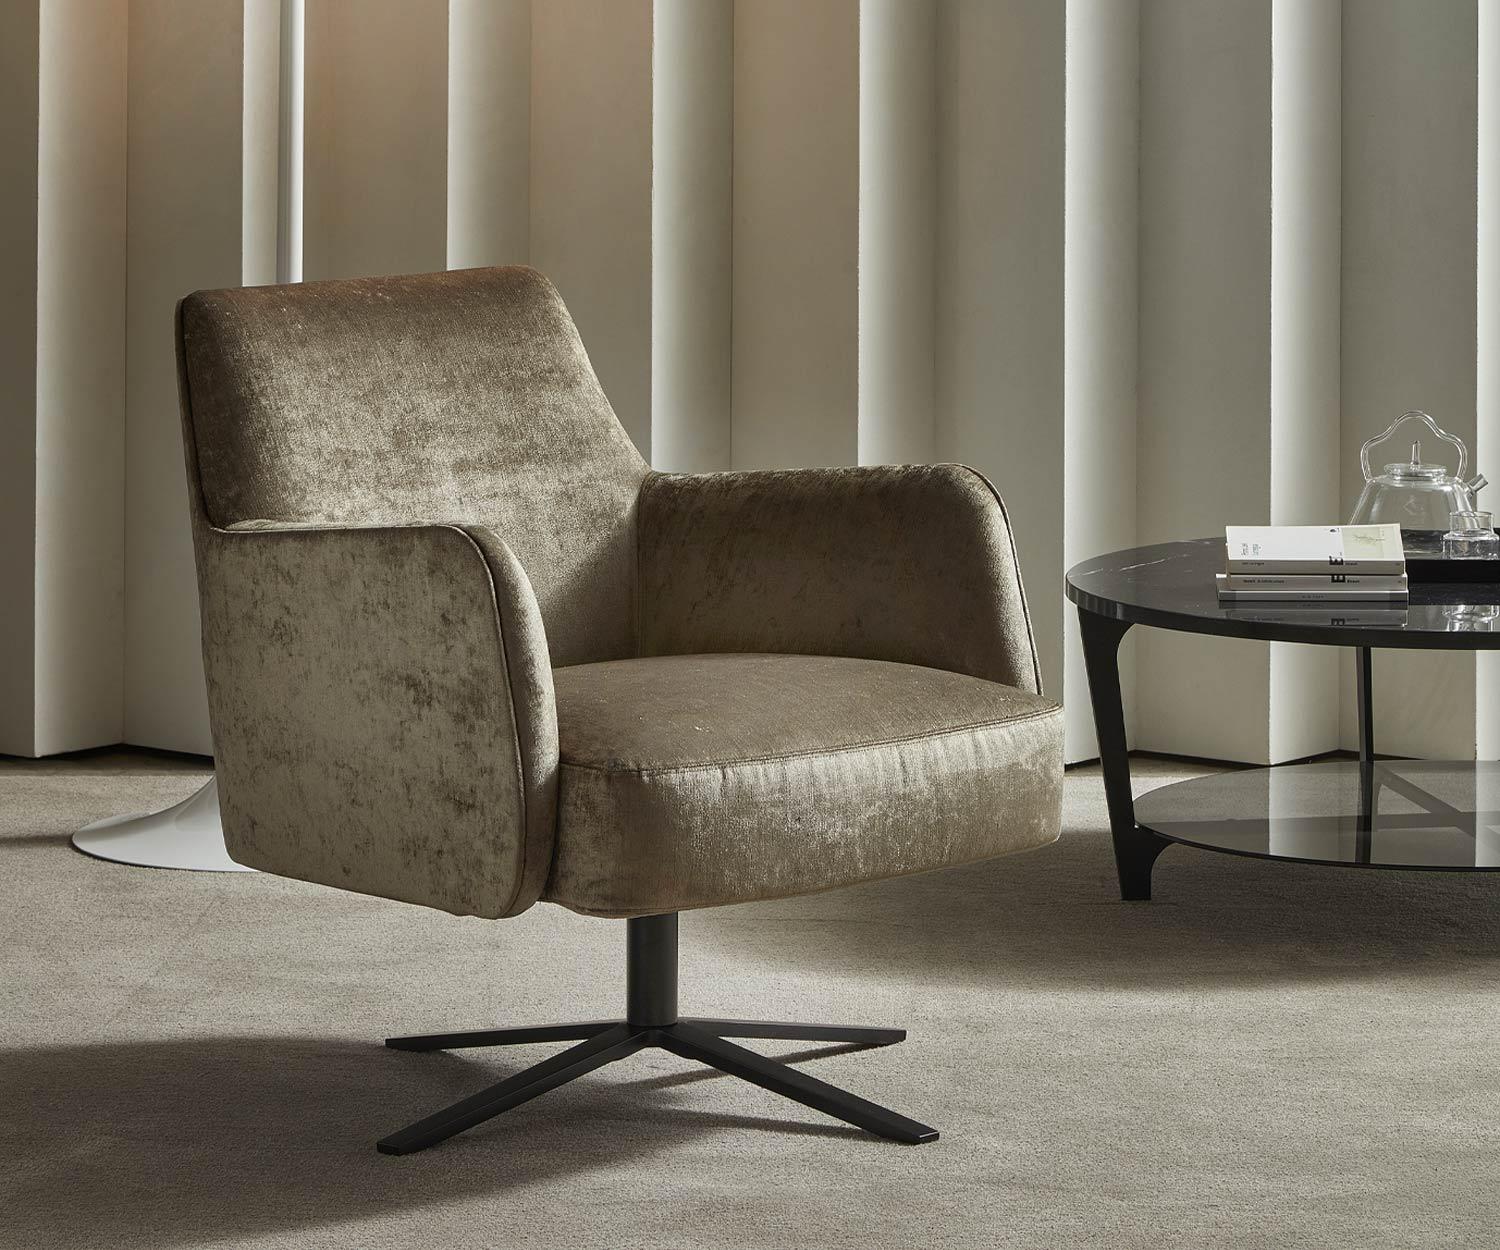 Exclusive Marelli Design armchair Clipper in beige with cross swivel base